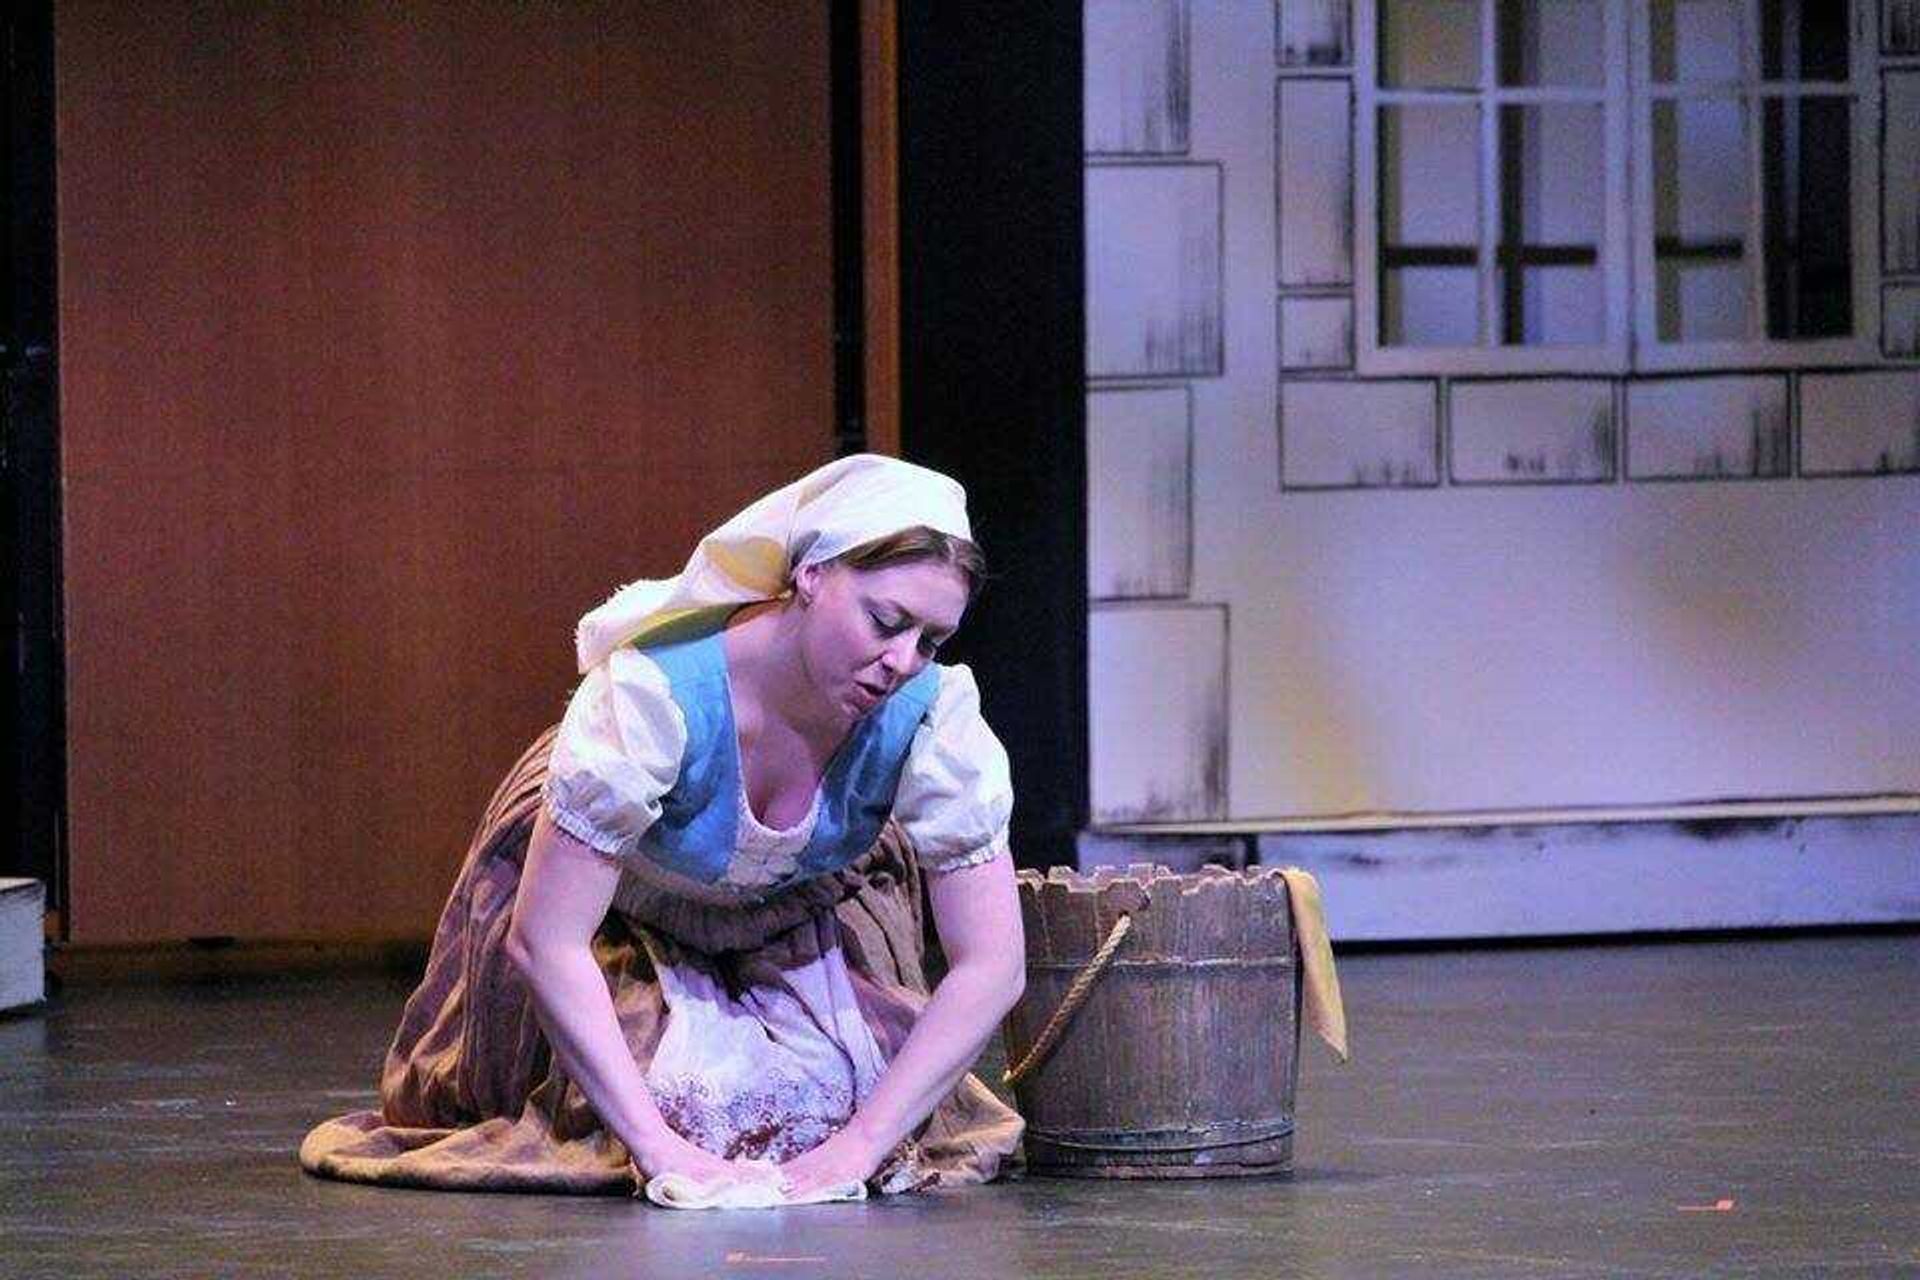 Cinderella, portrayed by Brittany Moleski, scrubs the floor during the opening act of 'Cinderella'